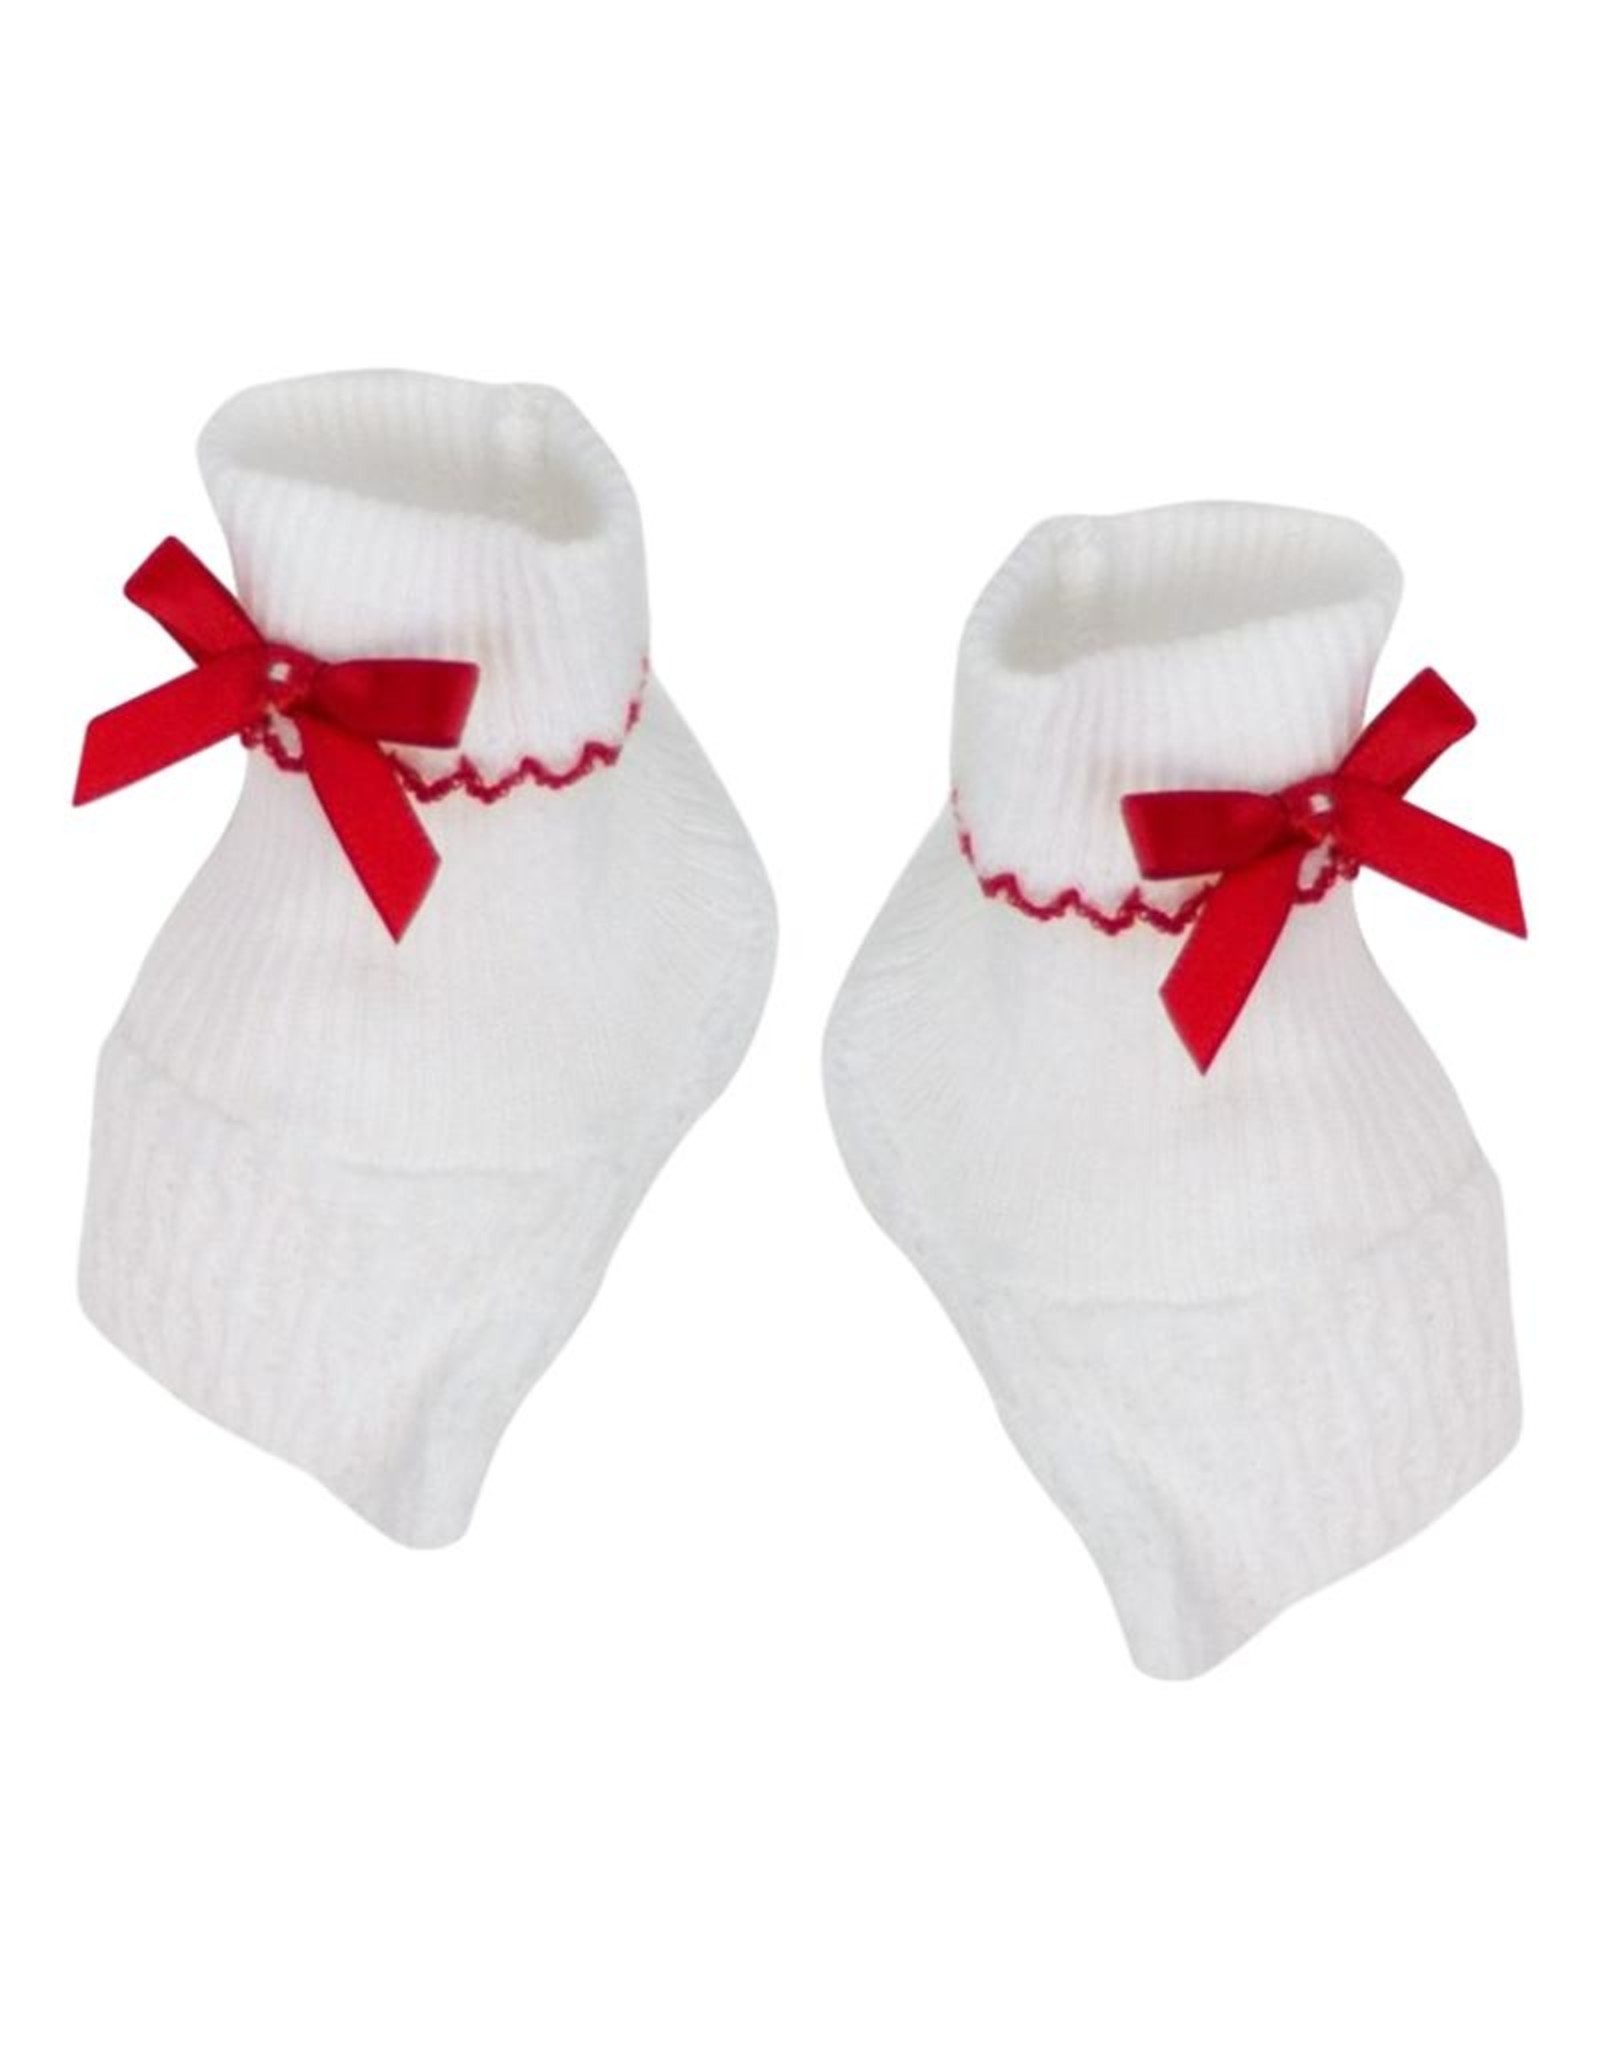 Paty, Inc. 158 Booties w/ Bow red